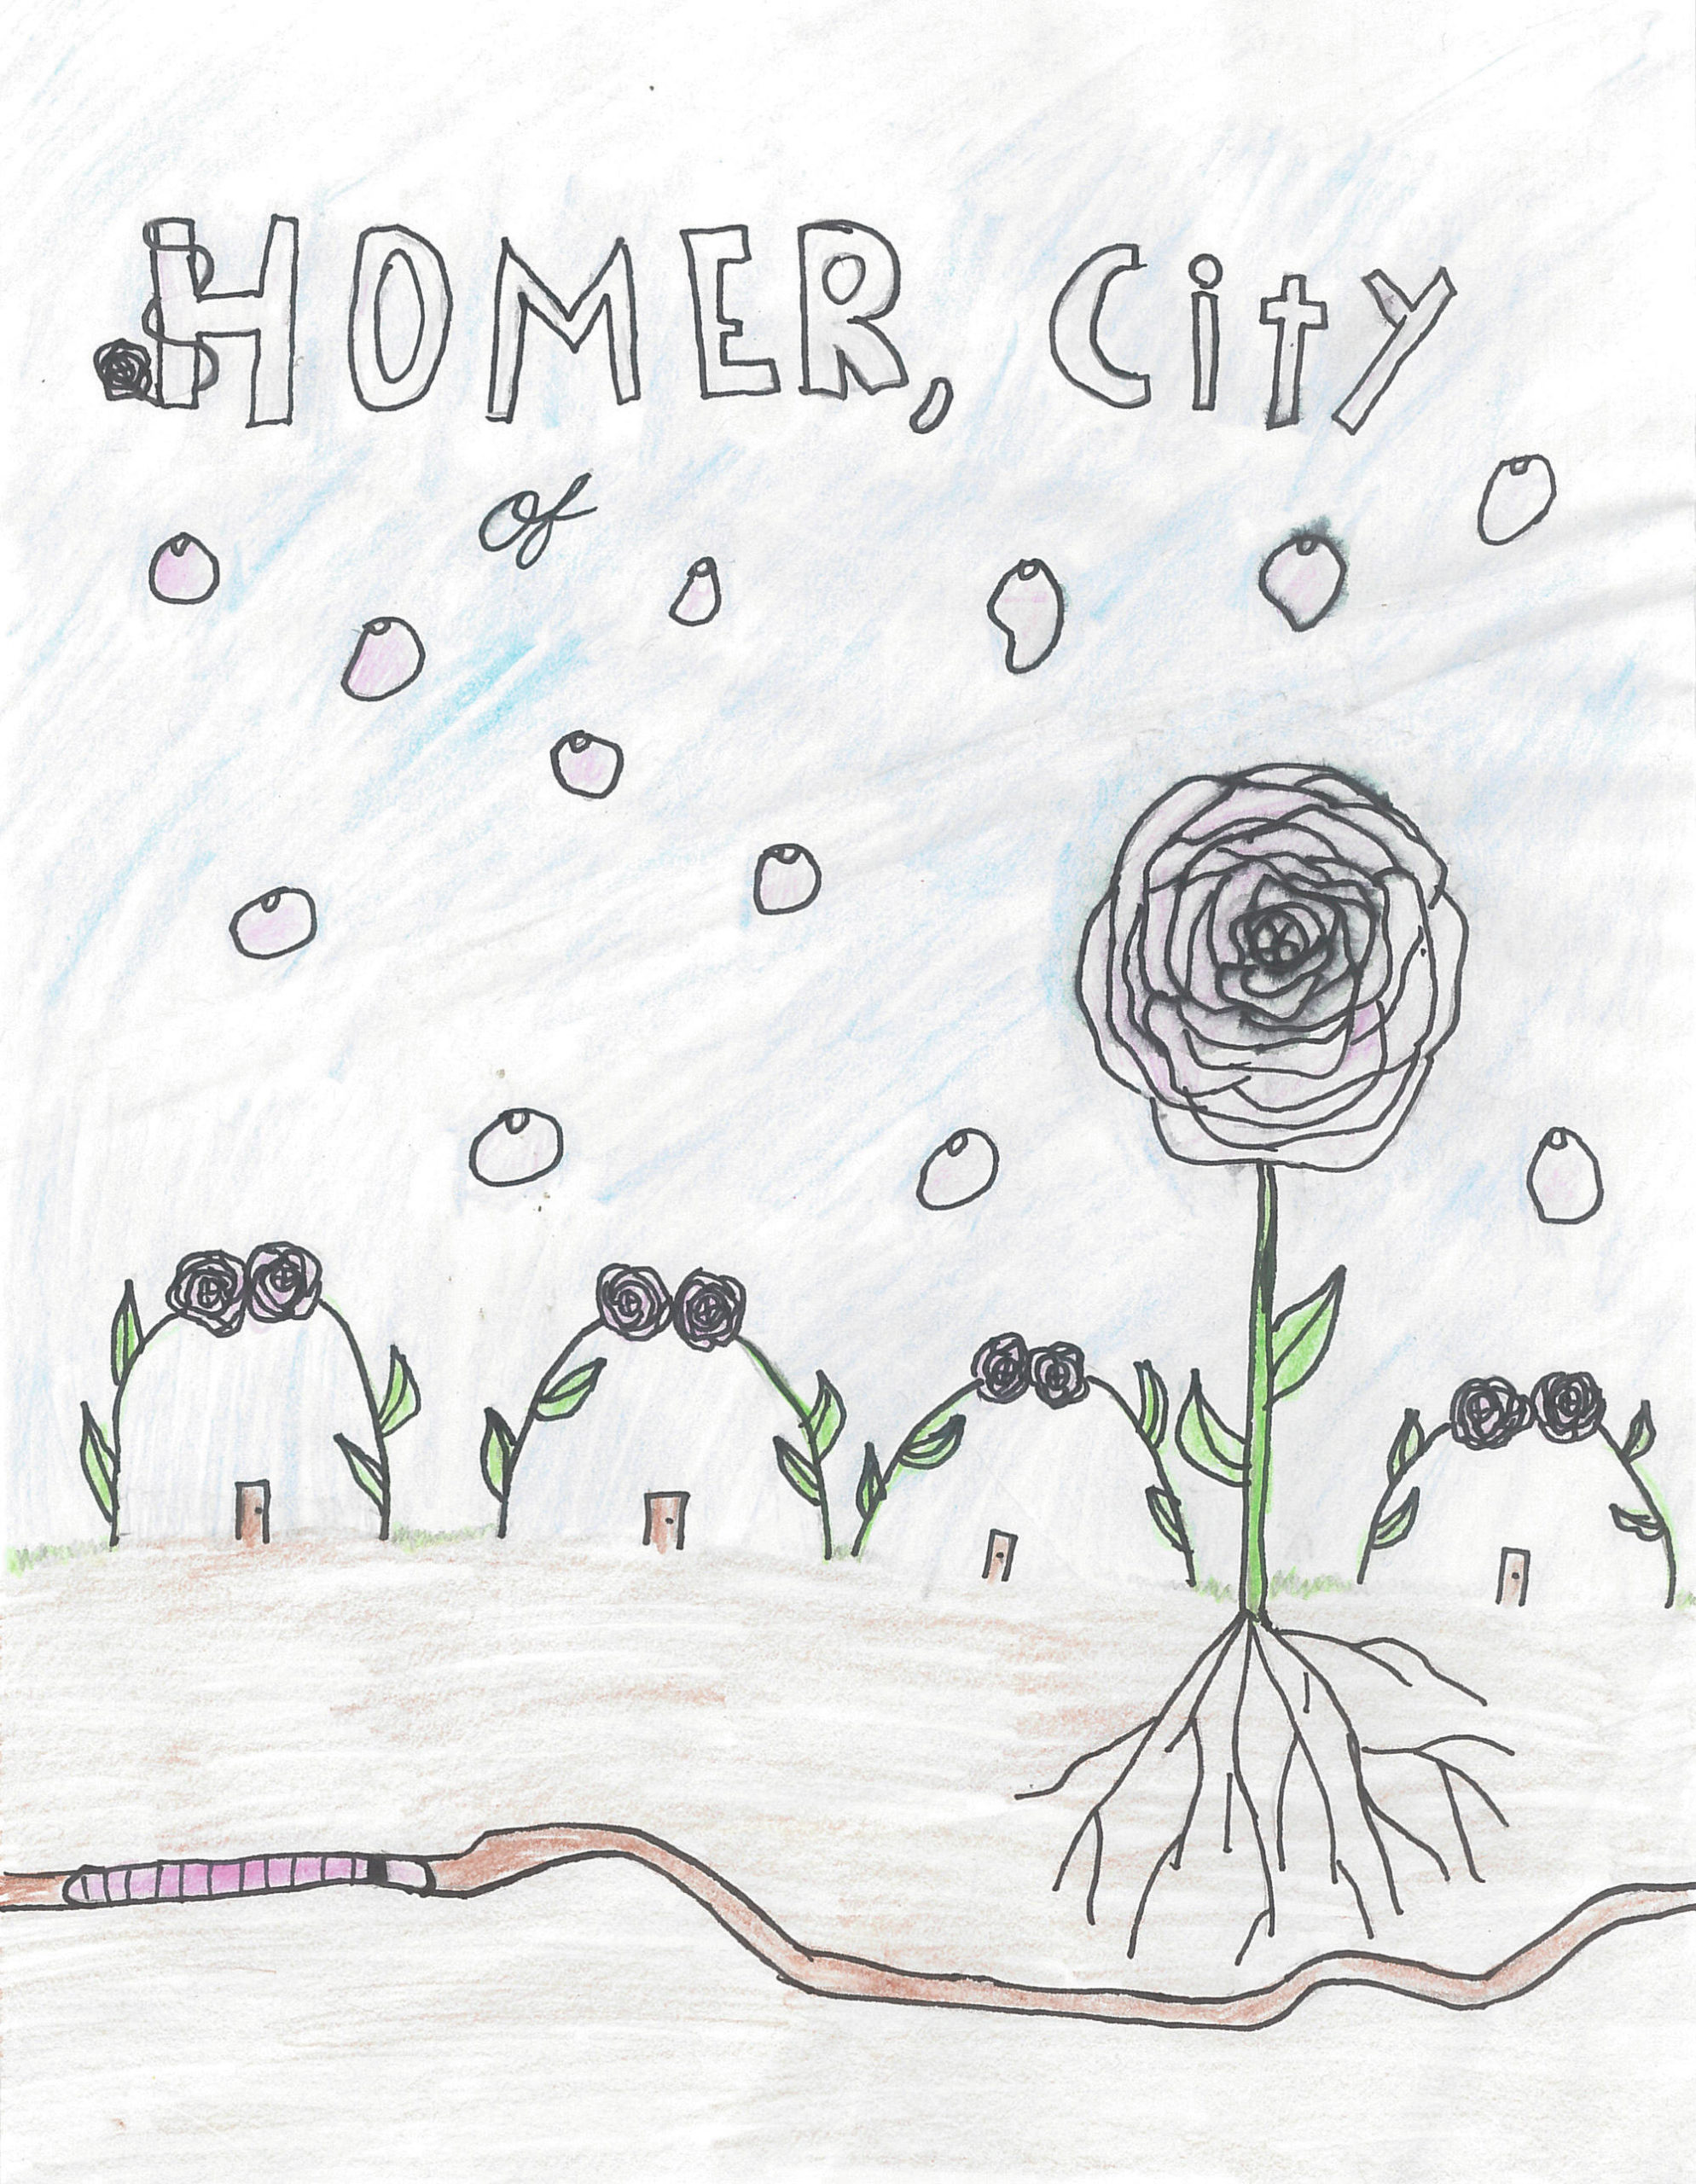 Catherine Davis’ winning poster in the grades 5-6 category for the Homer Council on the Arts “Homer, City of Peonies” contest. (Photo courtesy Homer Council on the Arts)